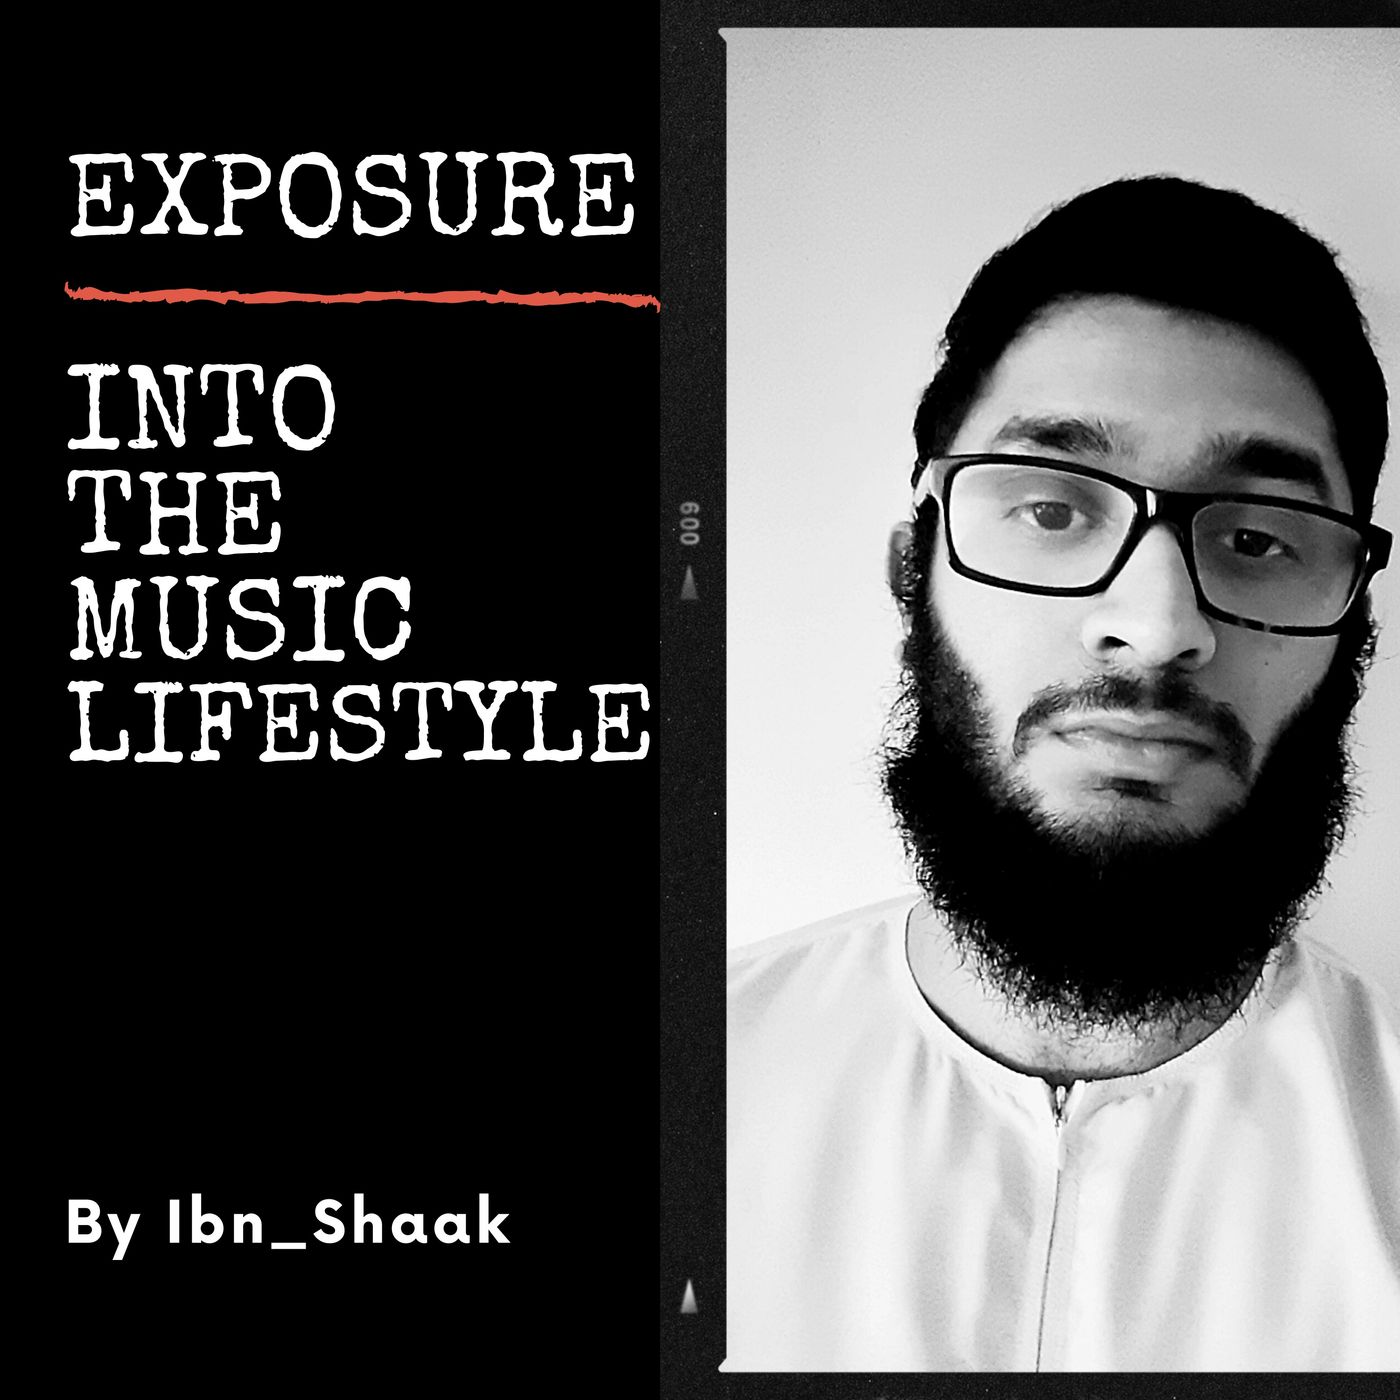 Exposure Into the Music Lifestyle